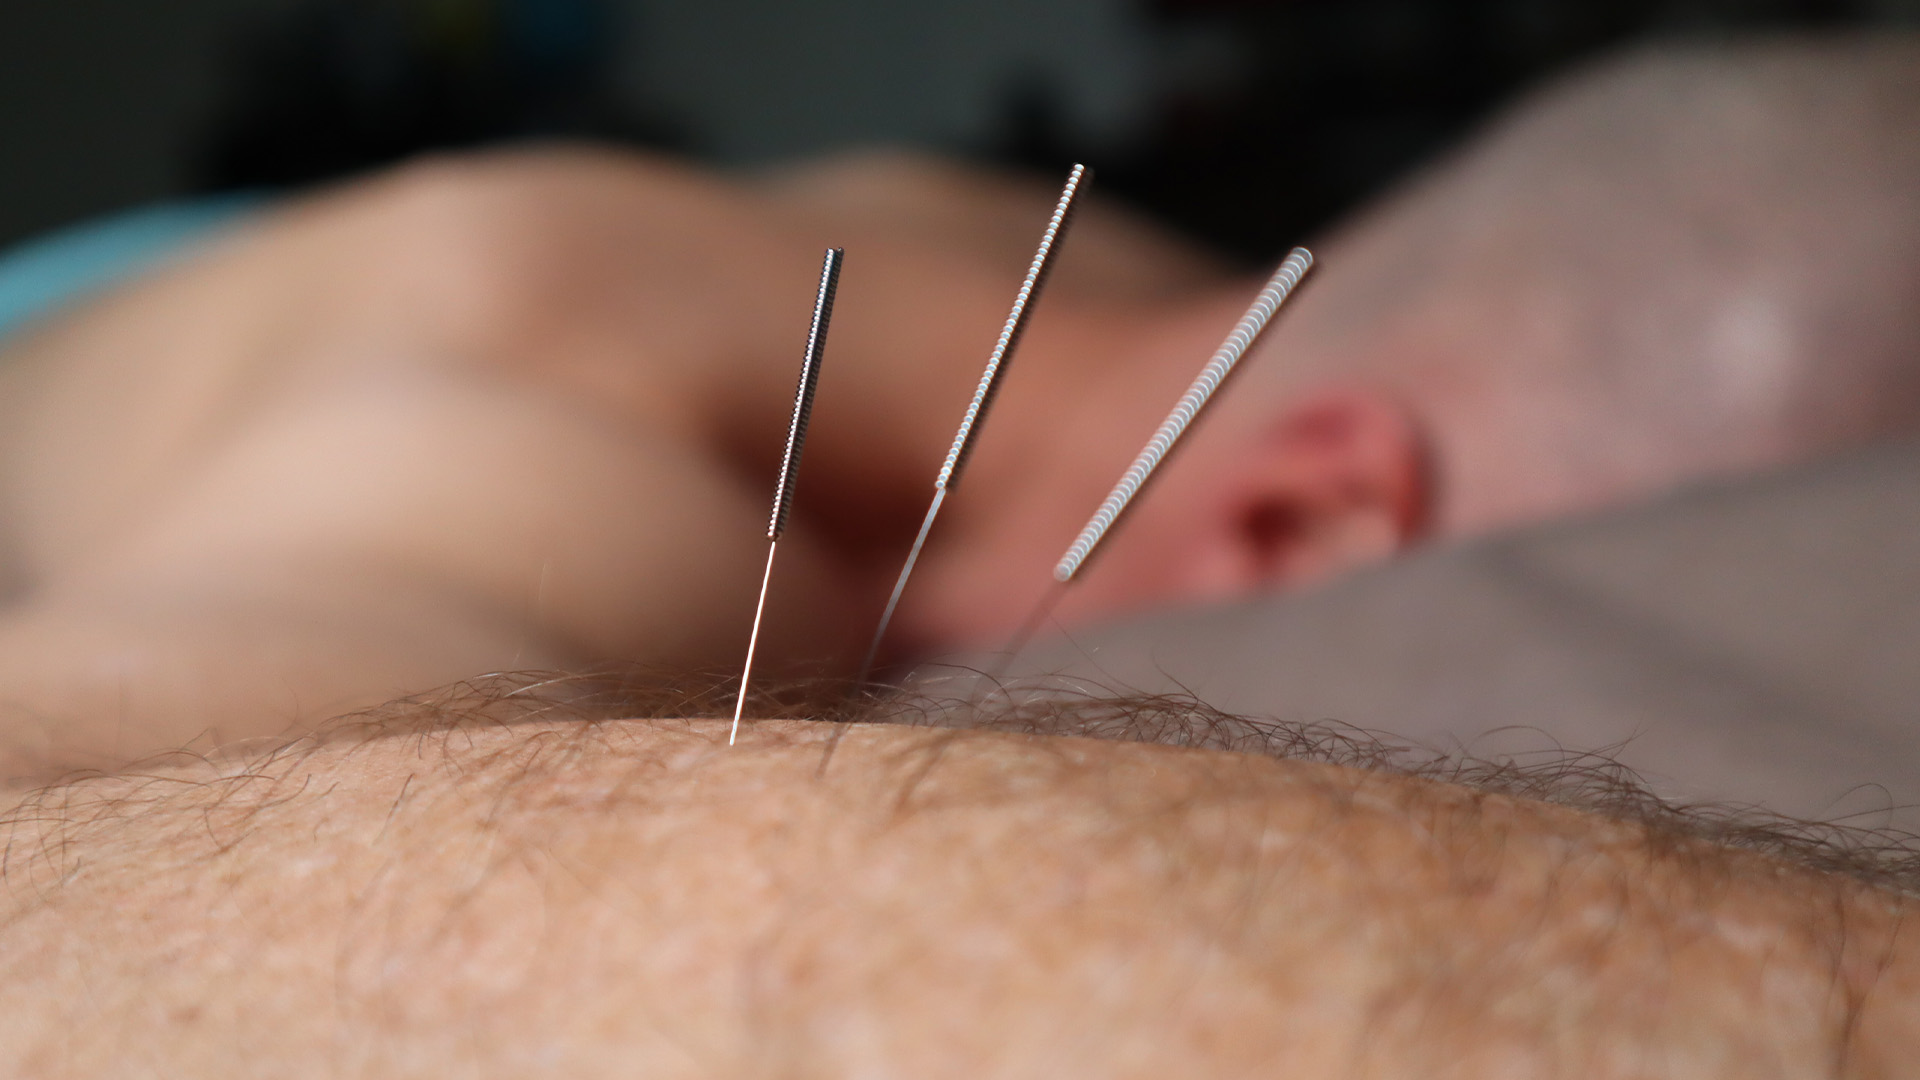 Manage Your Urinary Health with Acupuncture